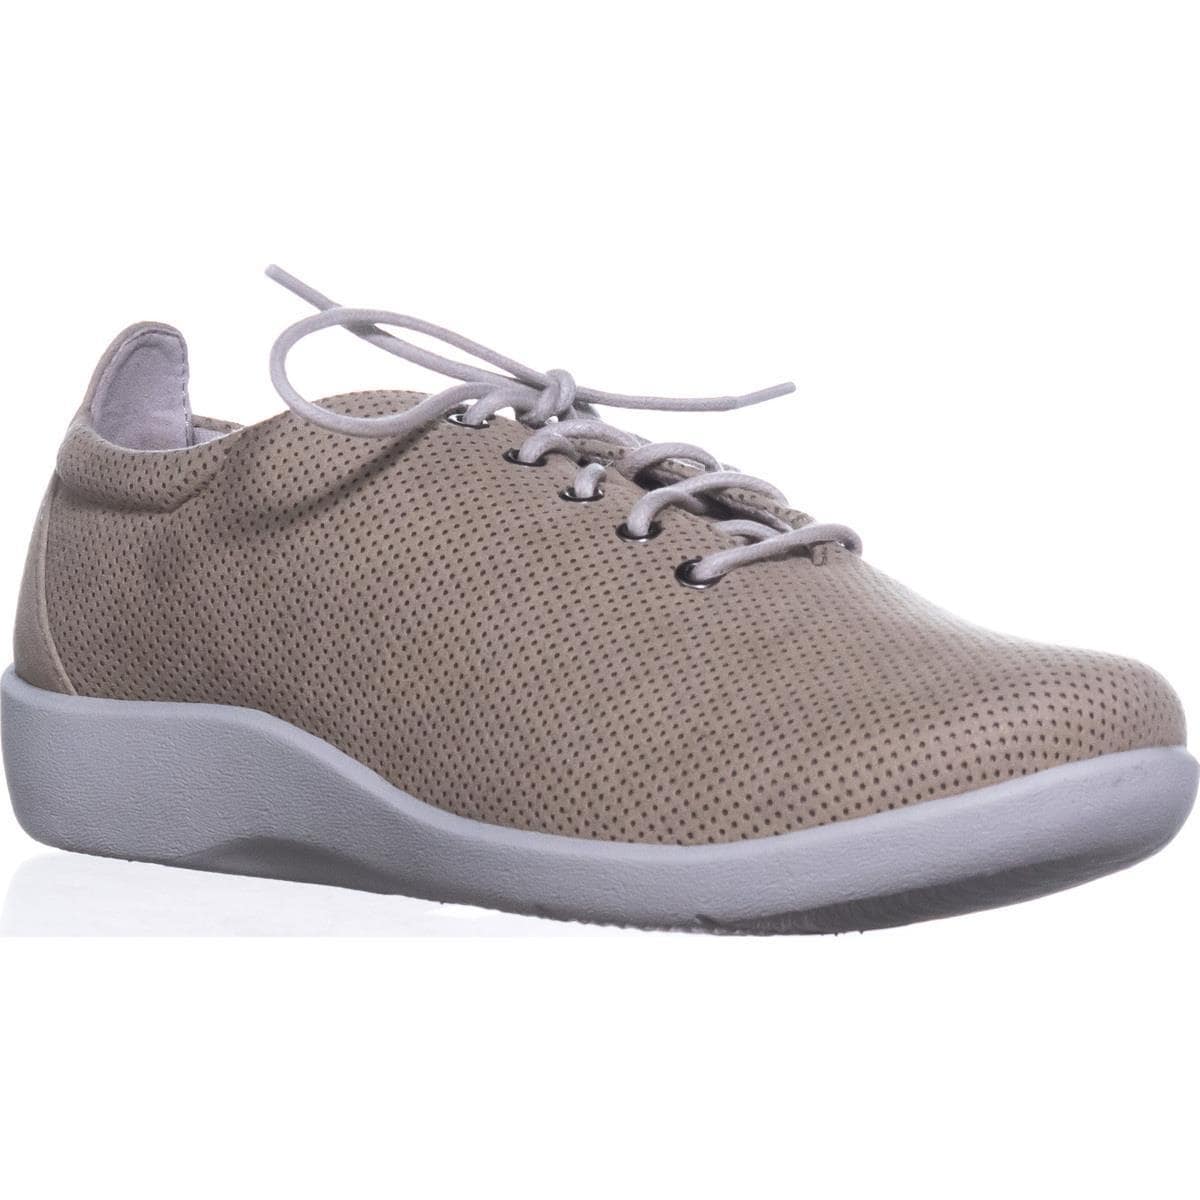 clarks cloudsteppers lace up